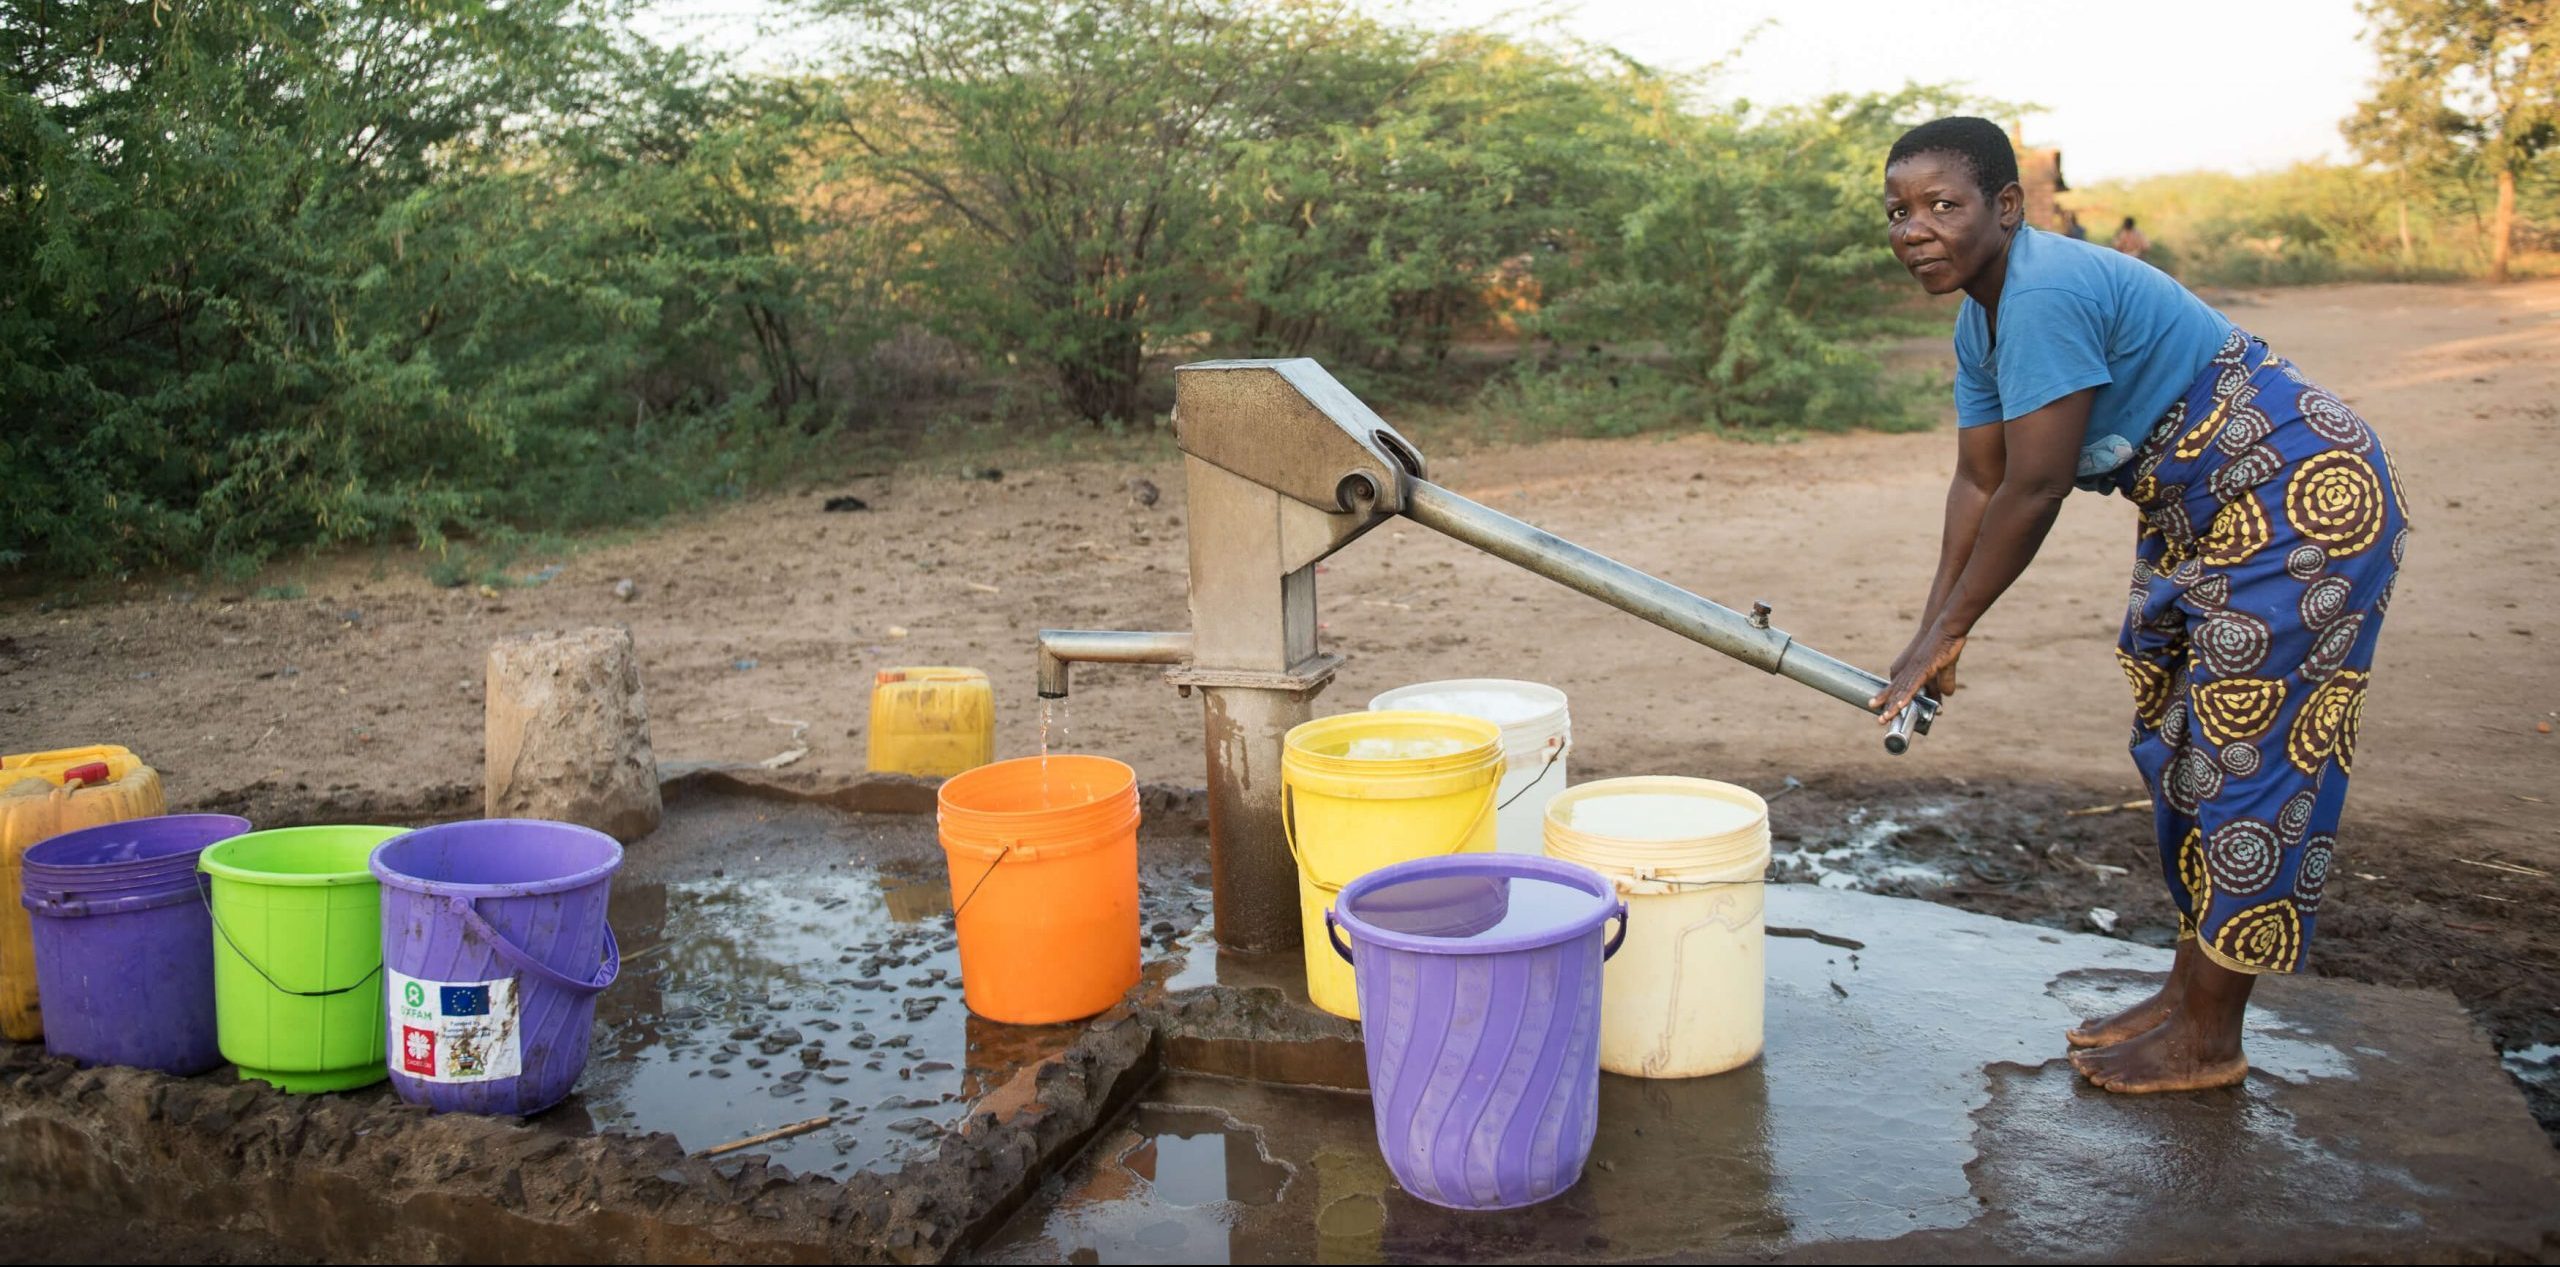 Joyce Luka who was displaced by Tropical Storm Ana and now lives in a well-wisher’s house is seen drawing water at a borehole at their village in Chikwawa, southern Malawi on 9 September 2022. Photo: Thoko Chikondi/Oxfam